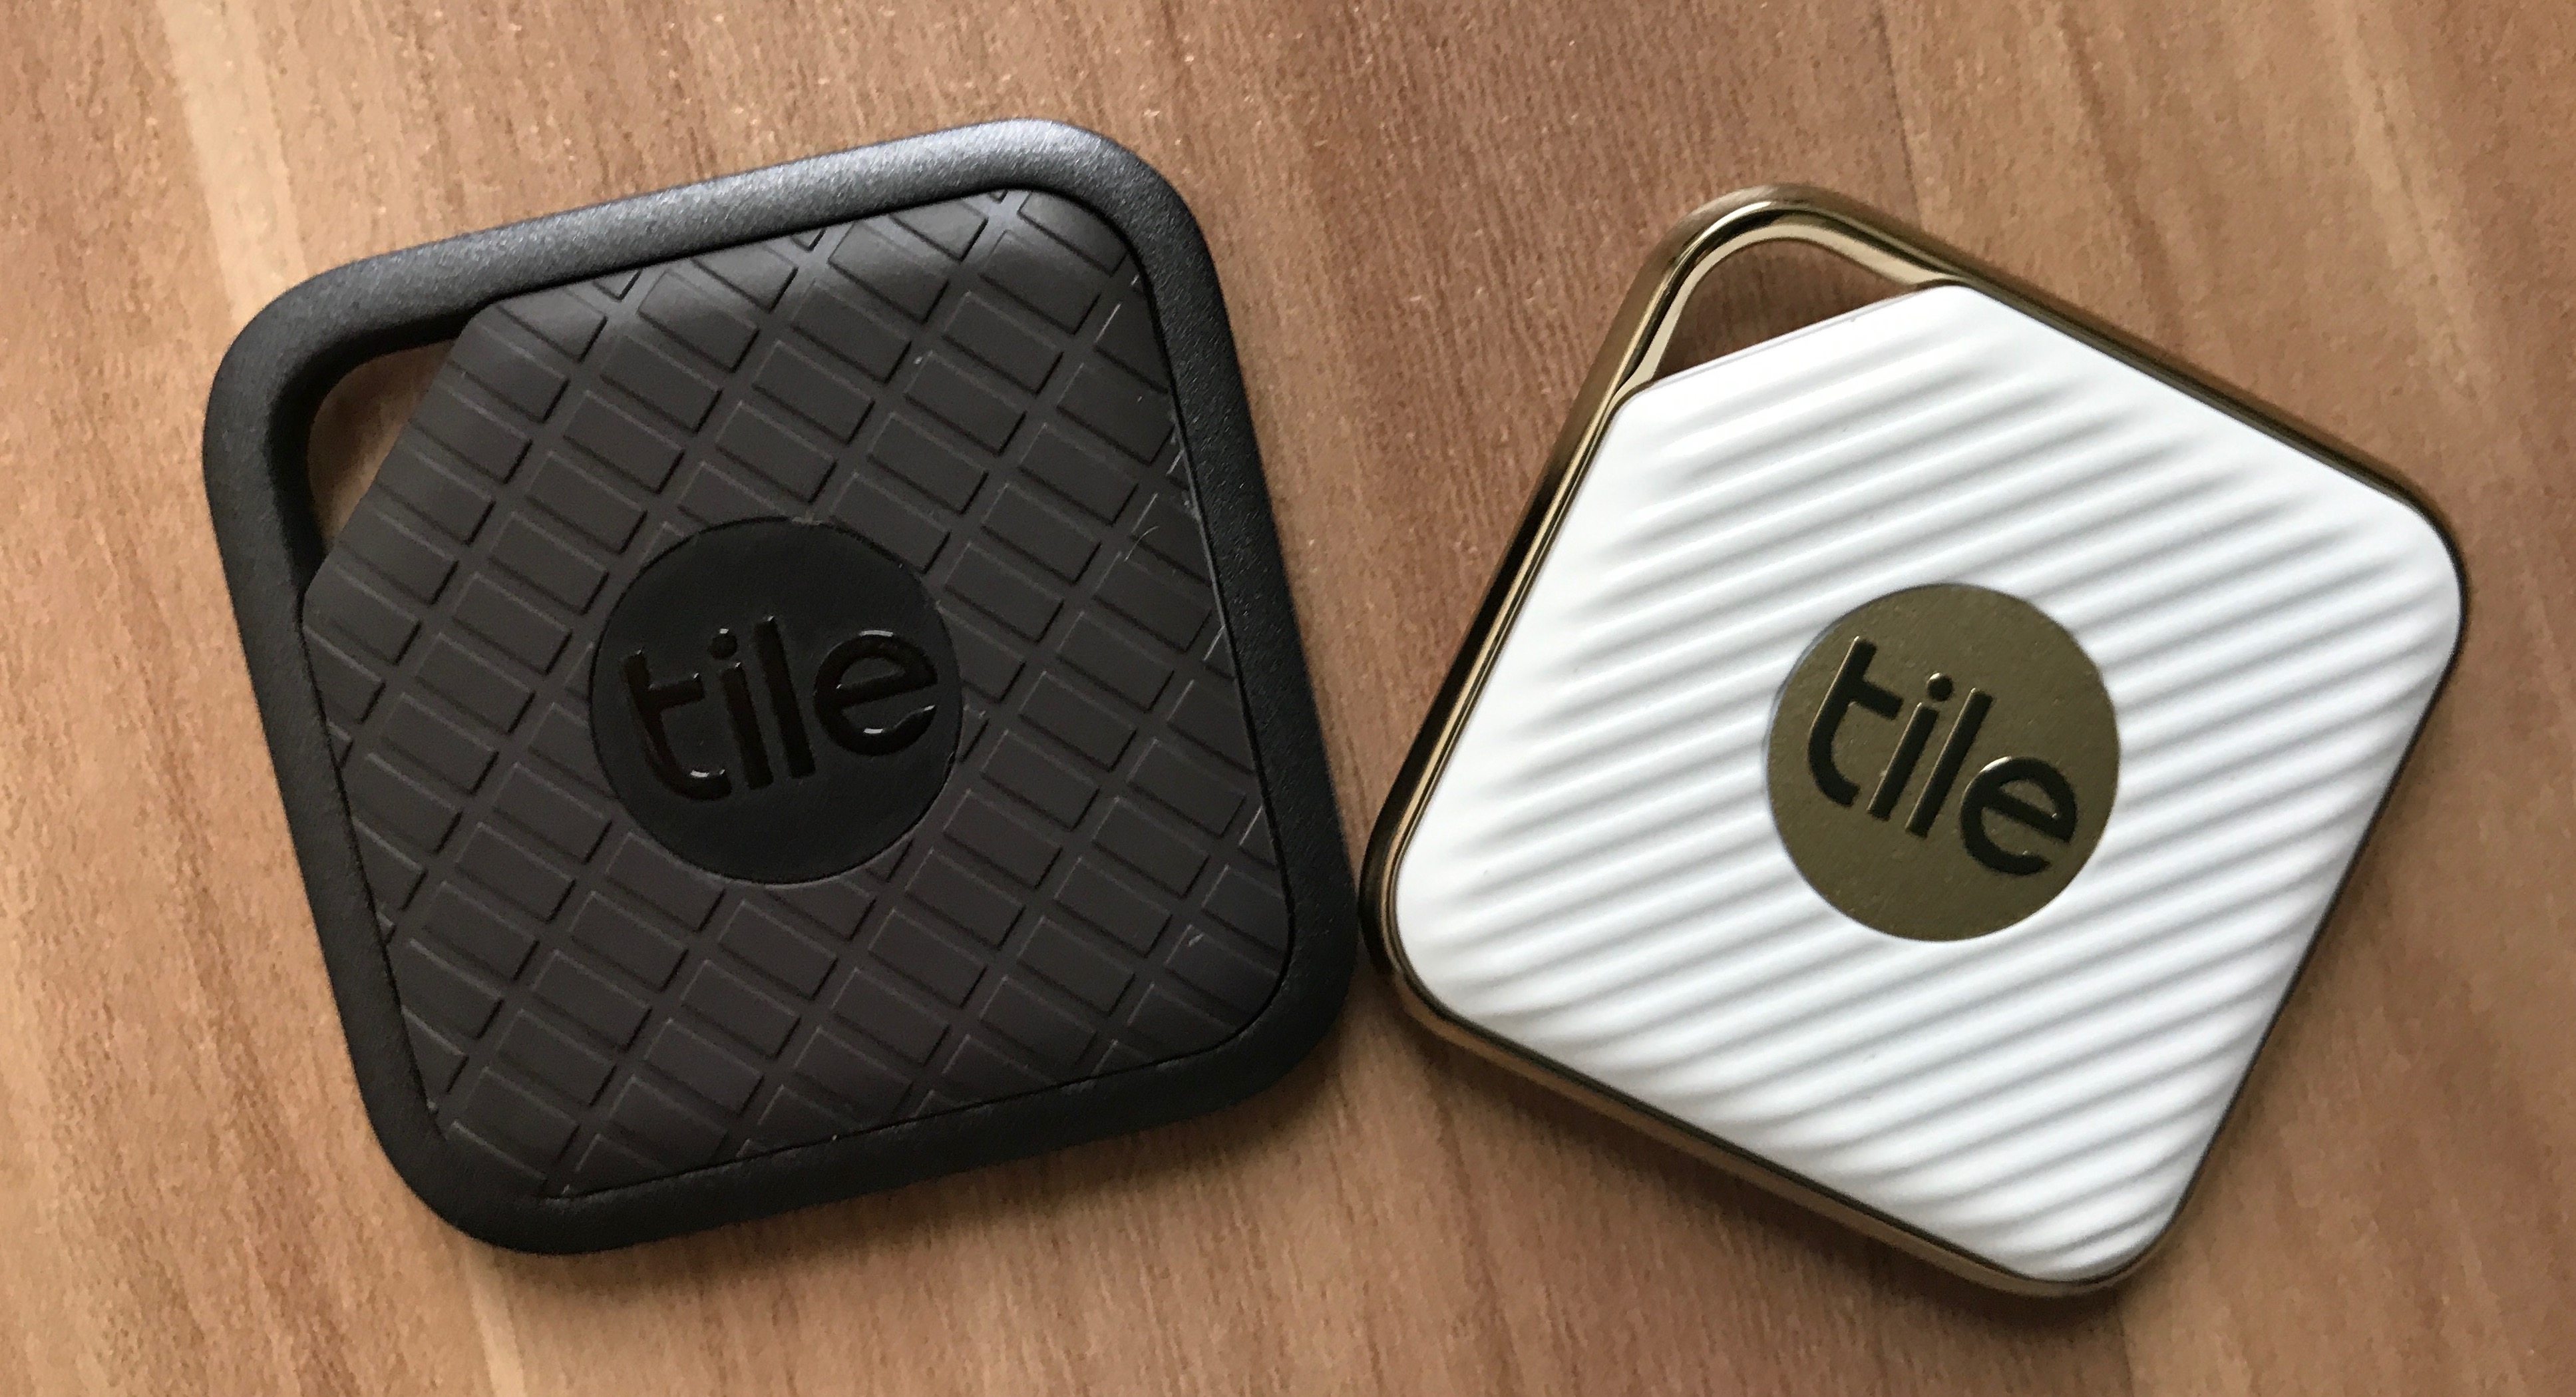 Tile lays off dozens after a disappointing holiday